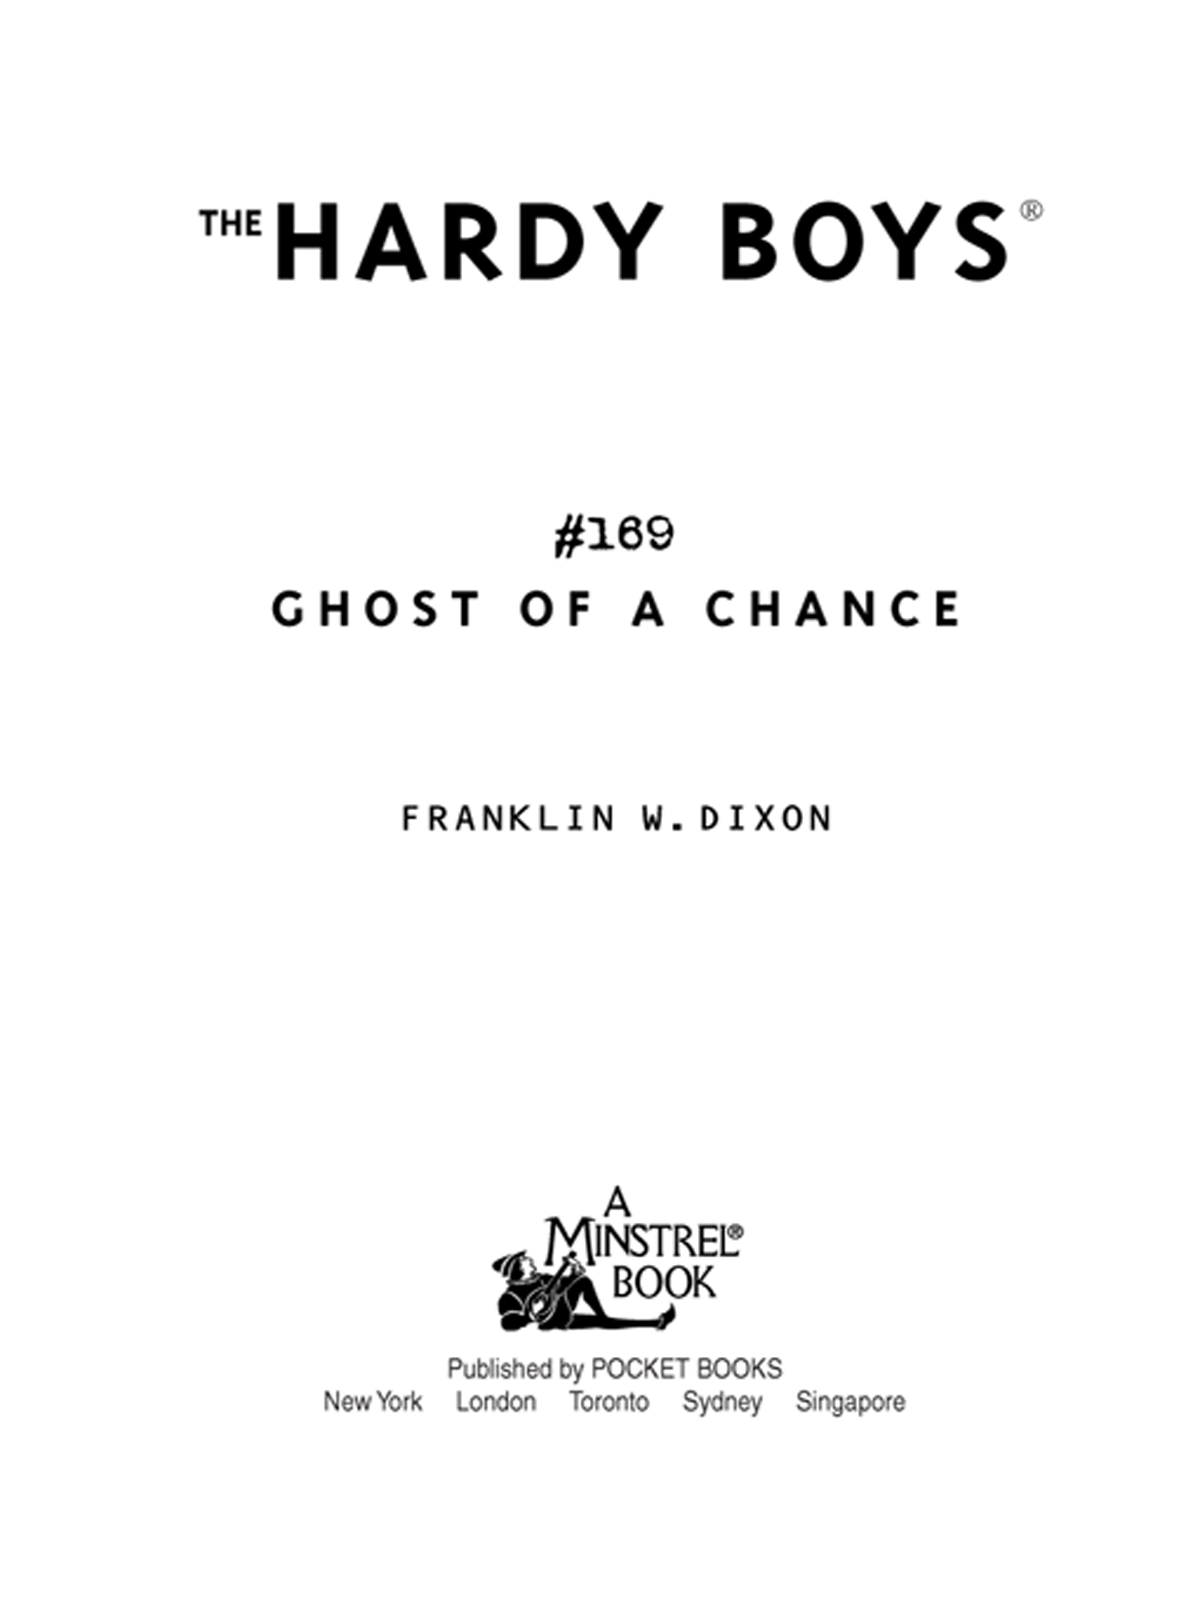 Ghost of a Chance by Franklin W. Dixon